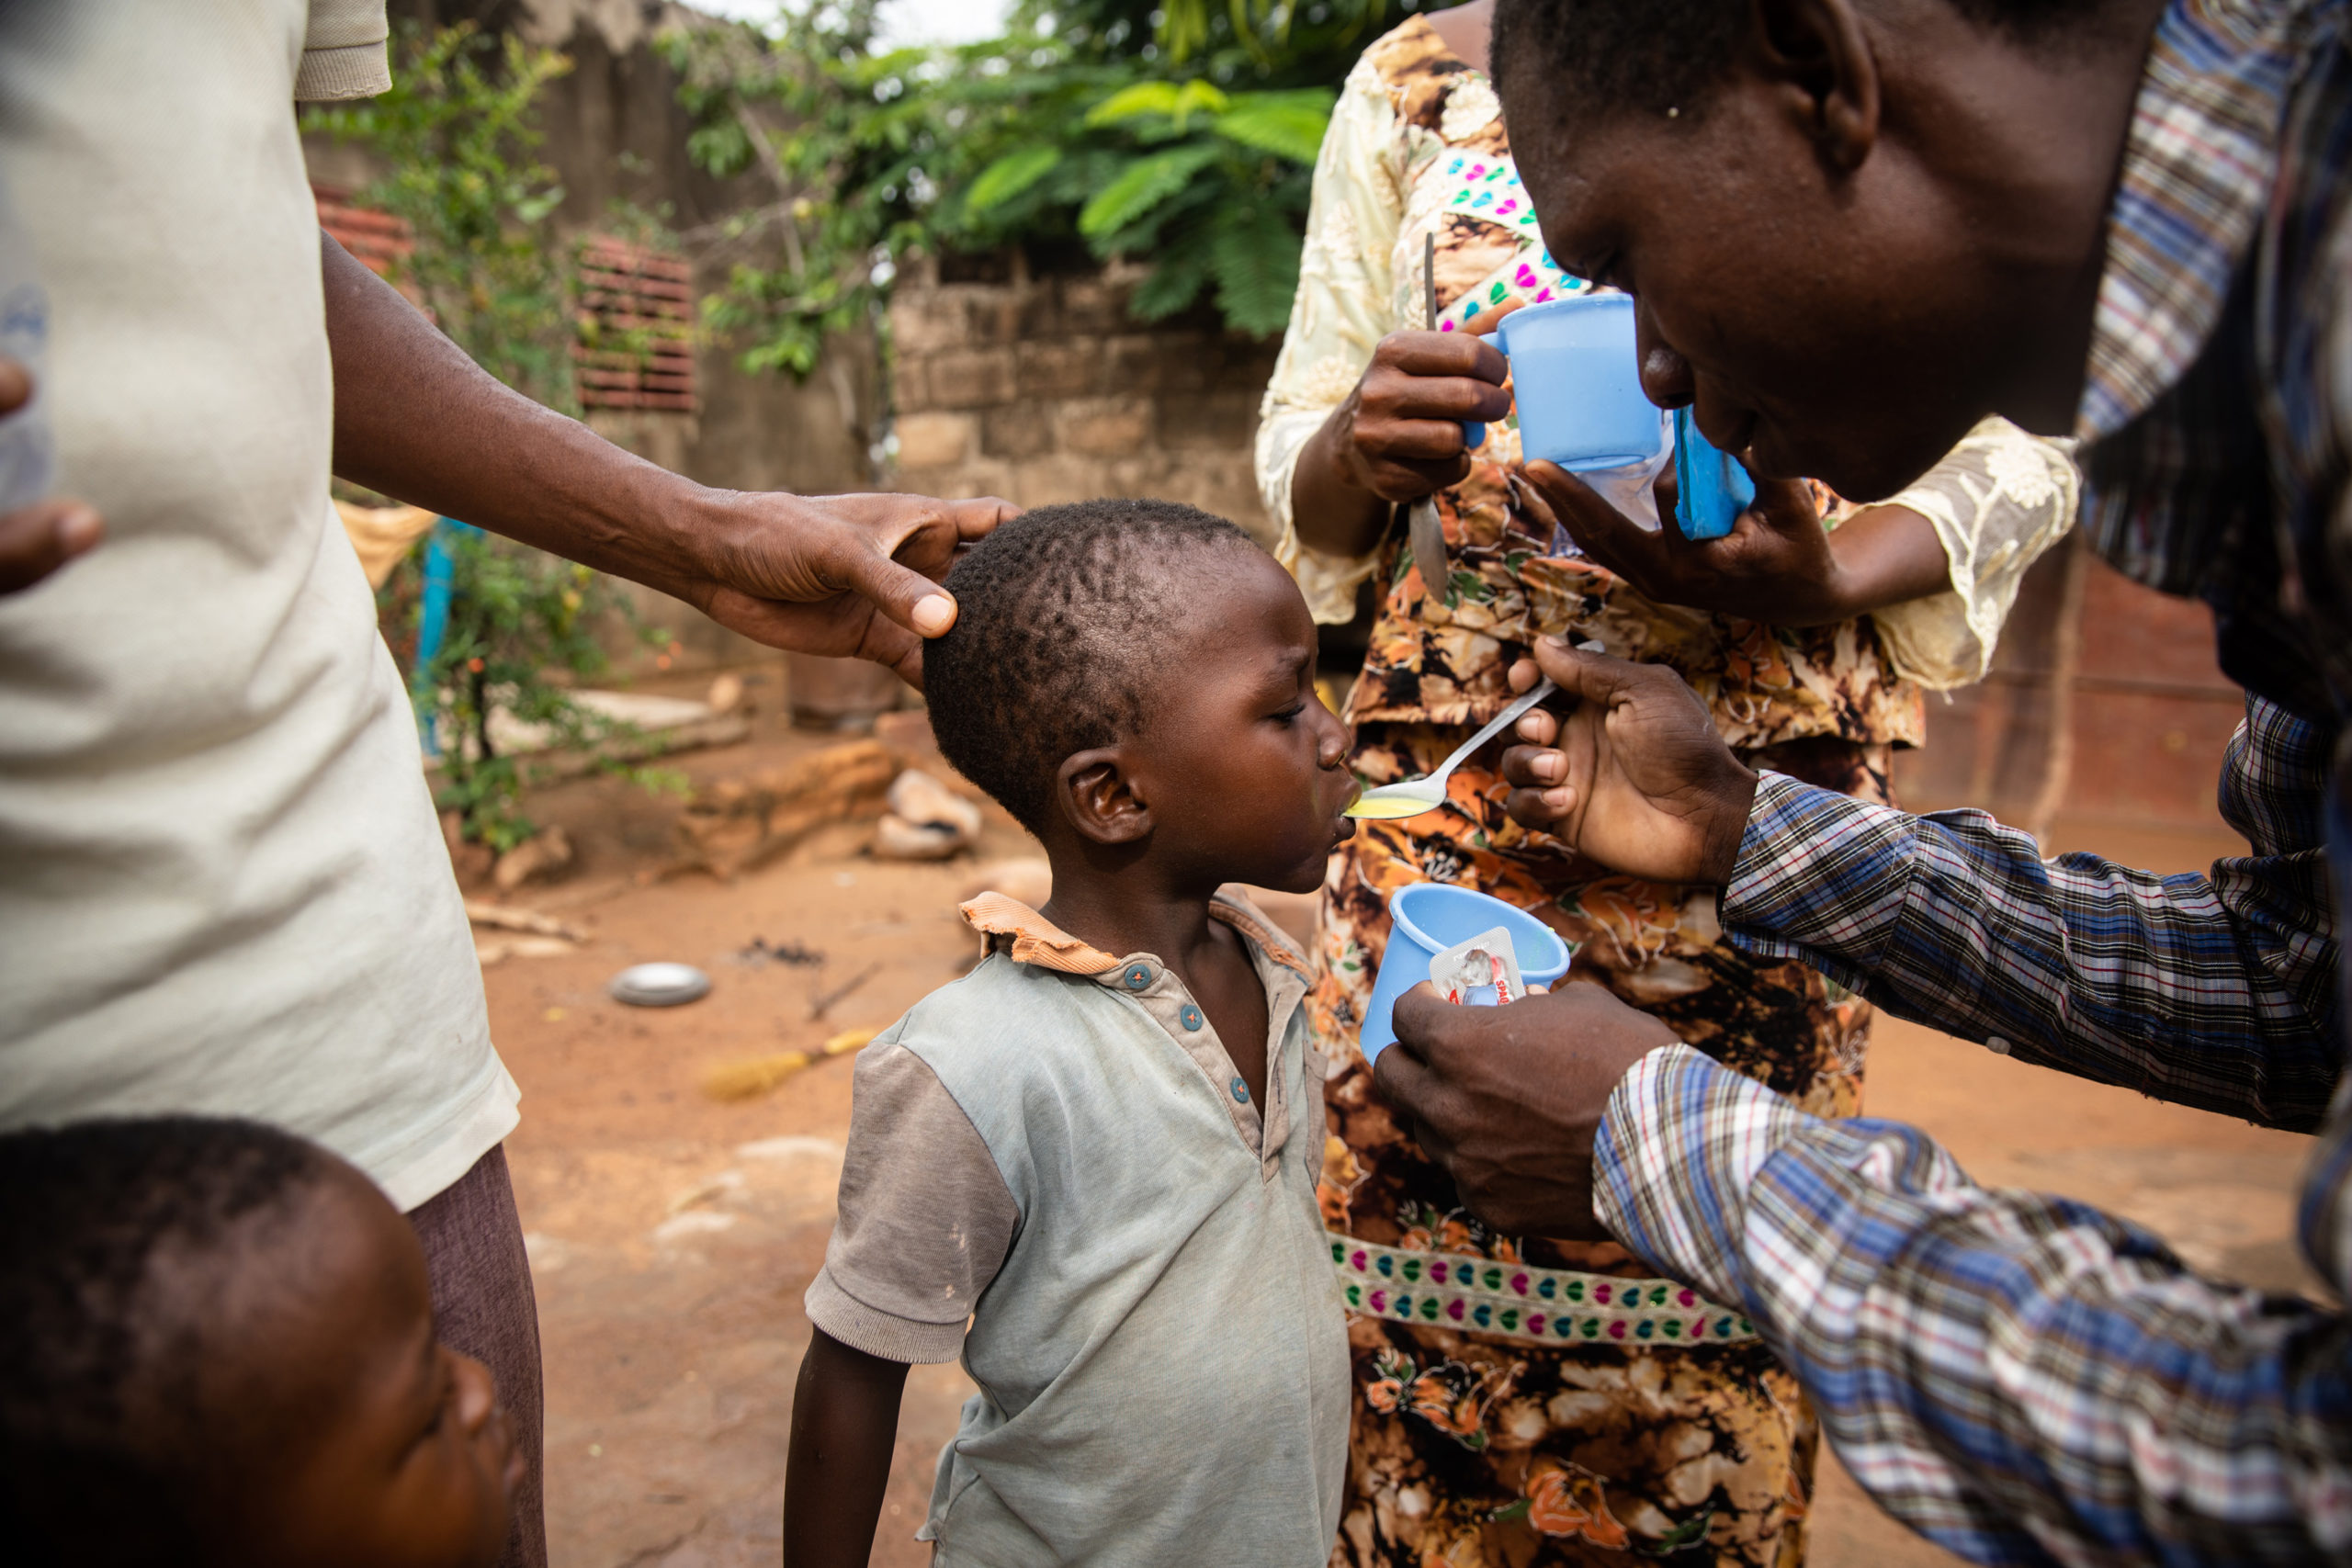 A step-by-step guide to distributing anti-malaria drugs to six million children